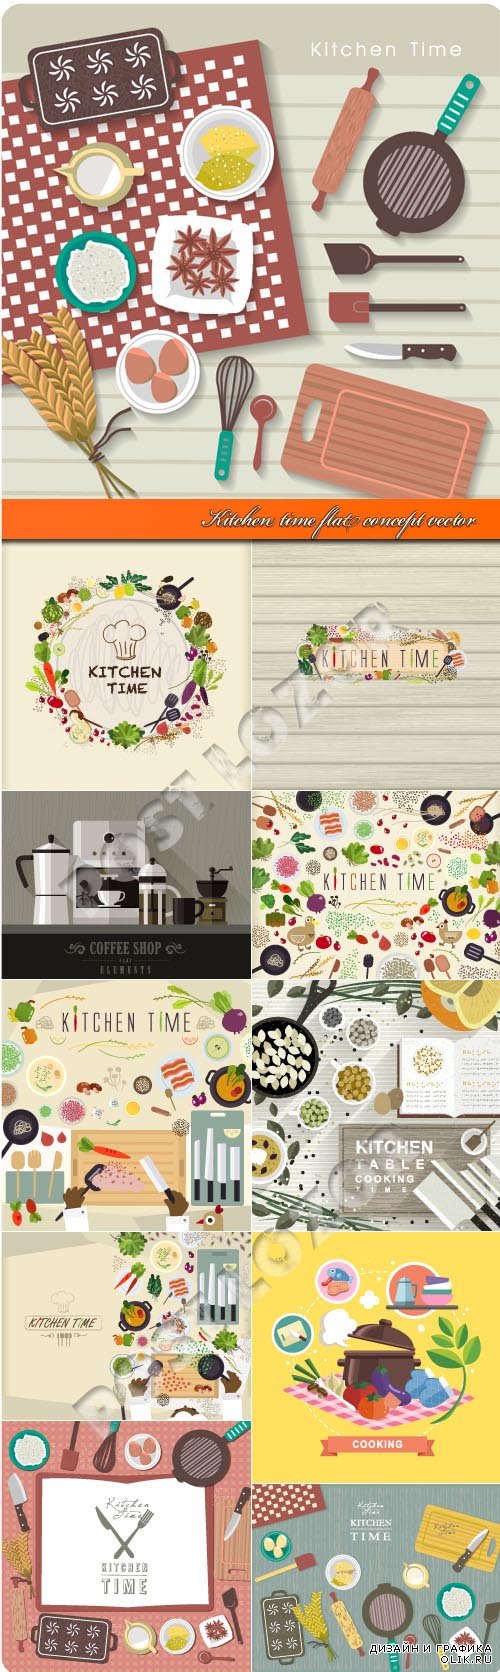 Kitchen time flat concept vector